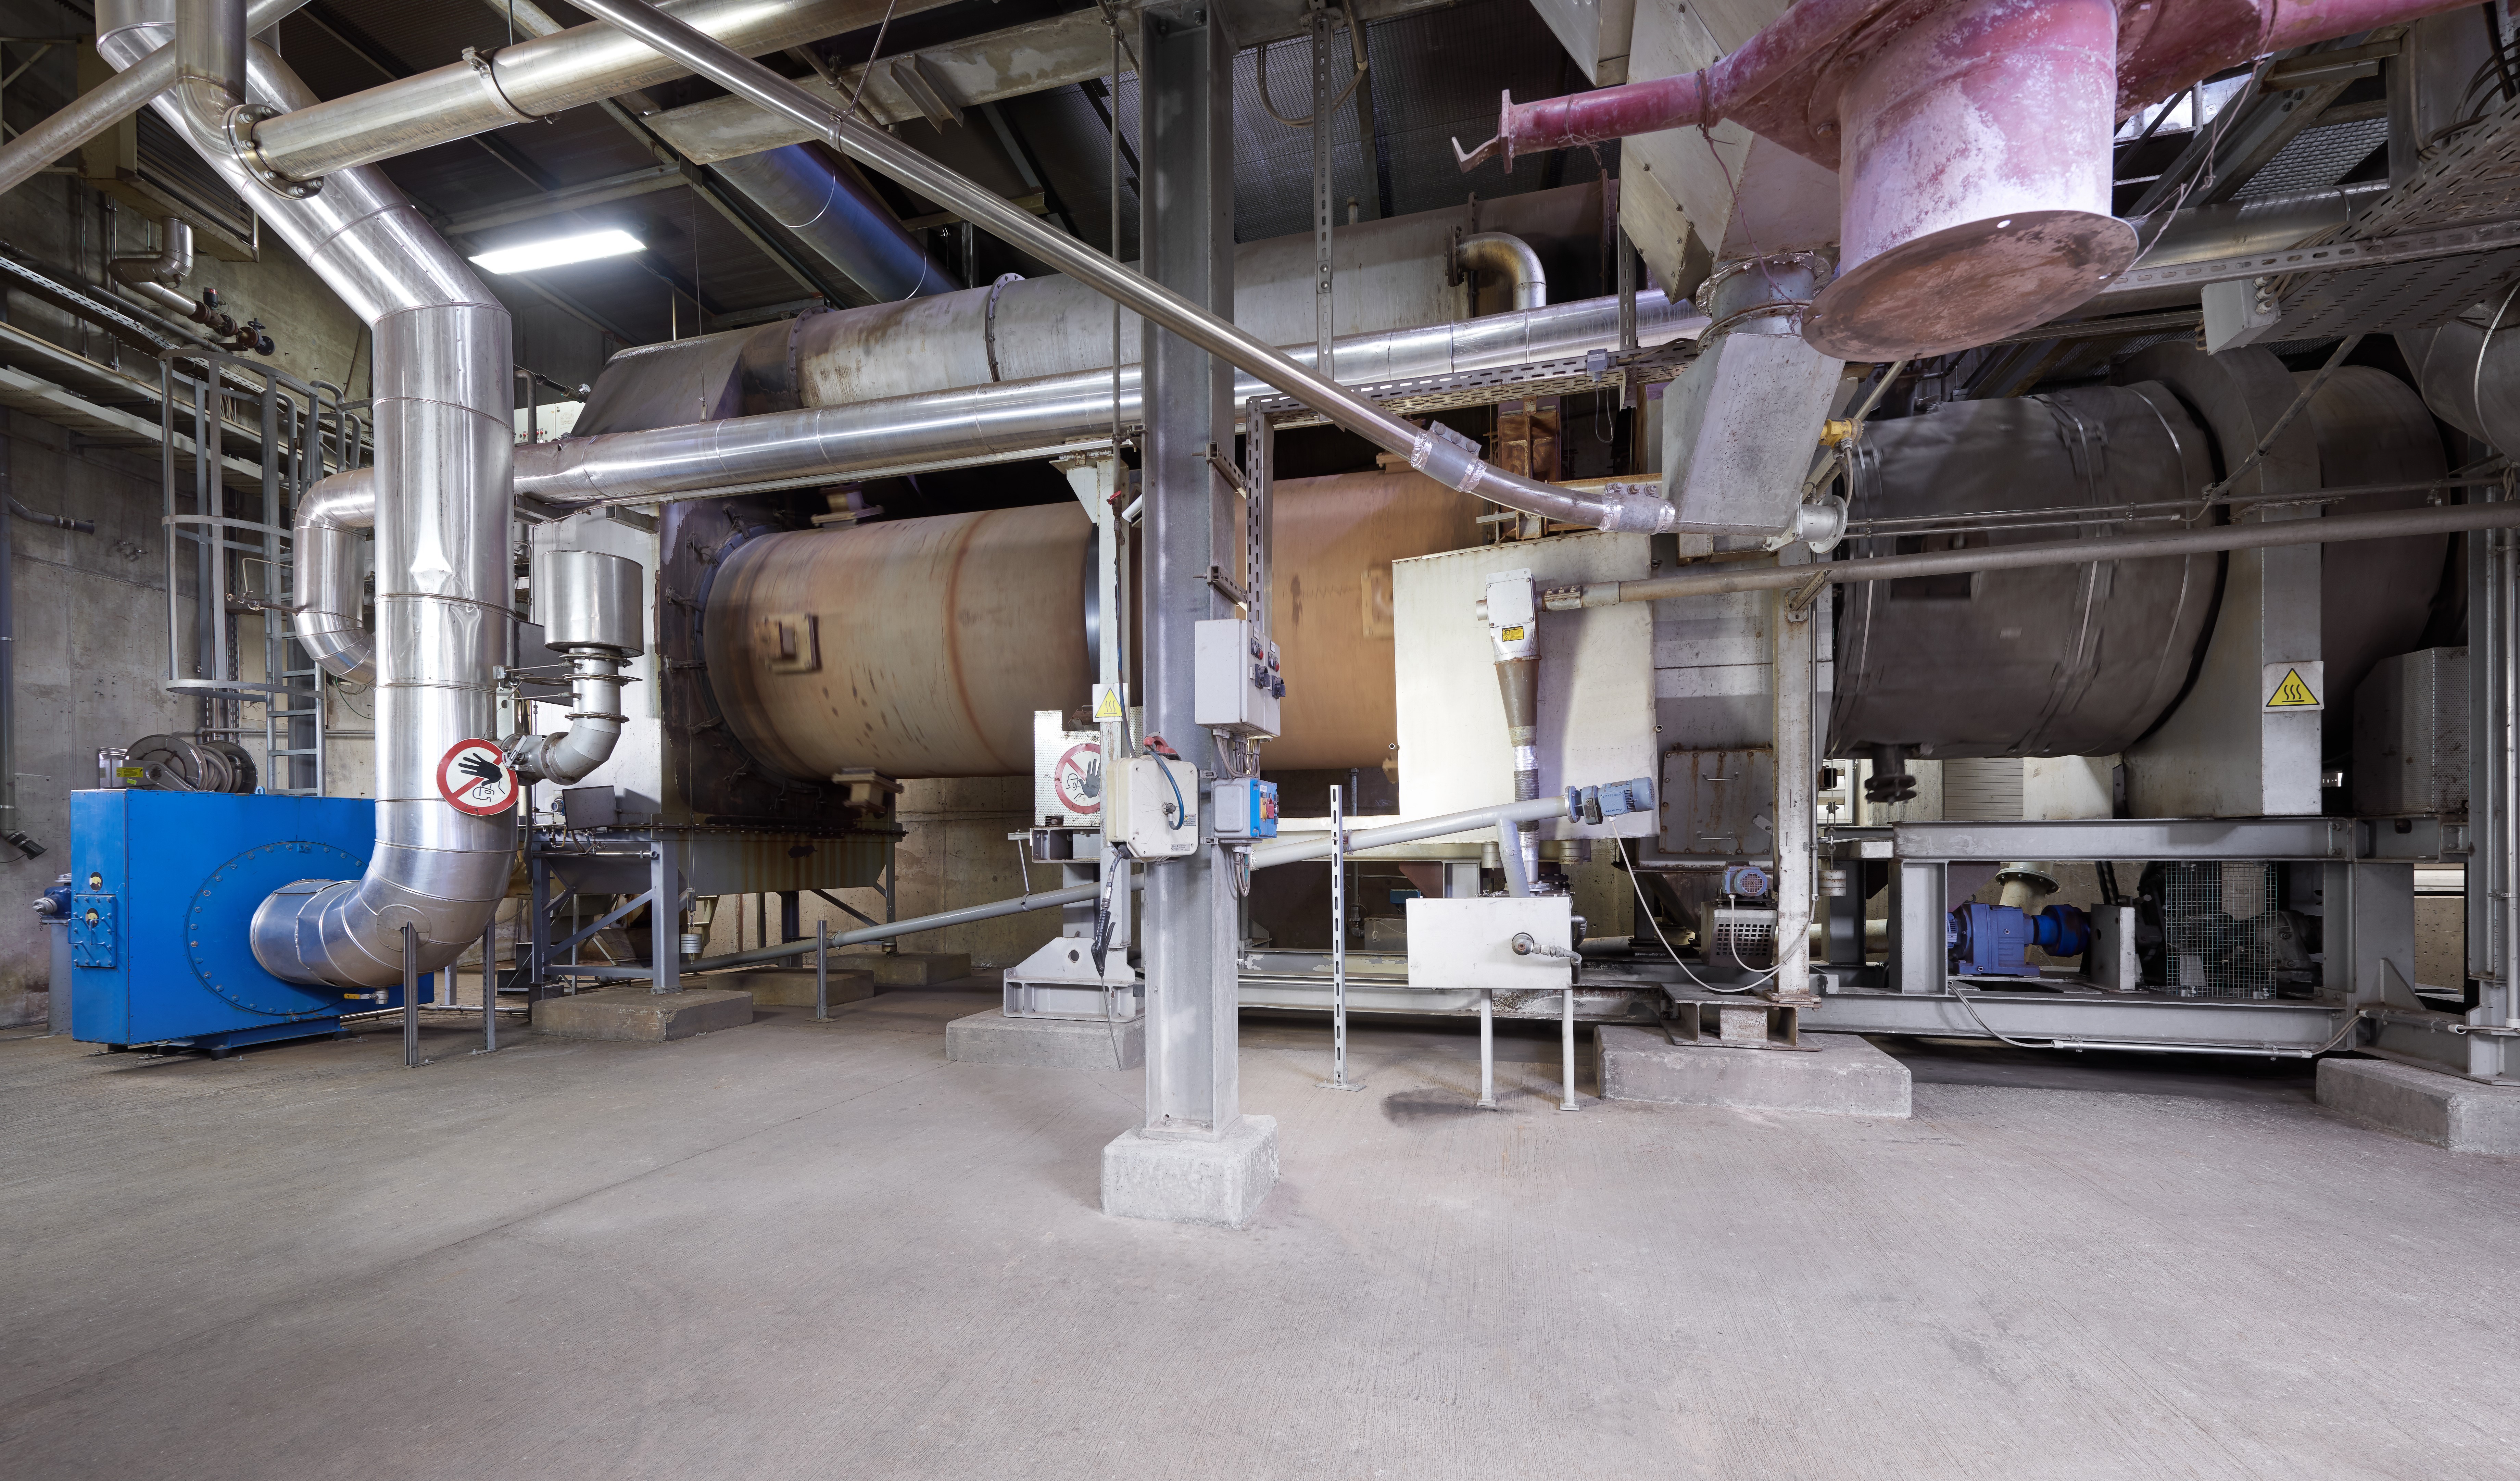 The thermal sludge recycling plant (TVA)